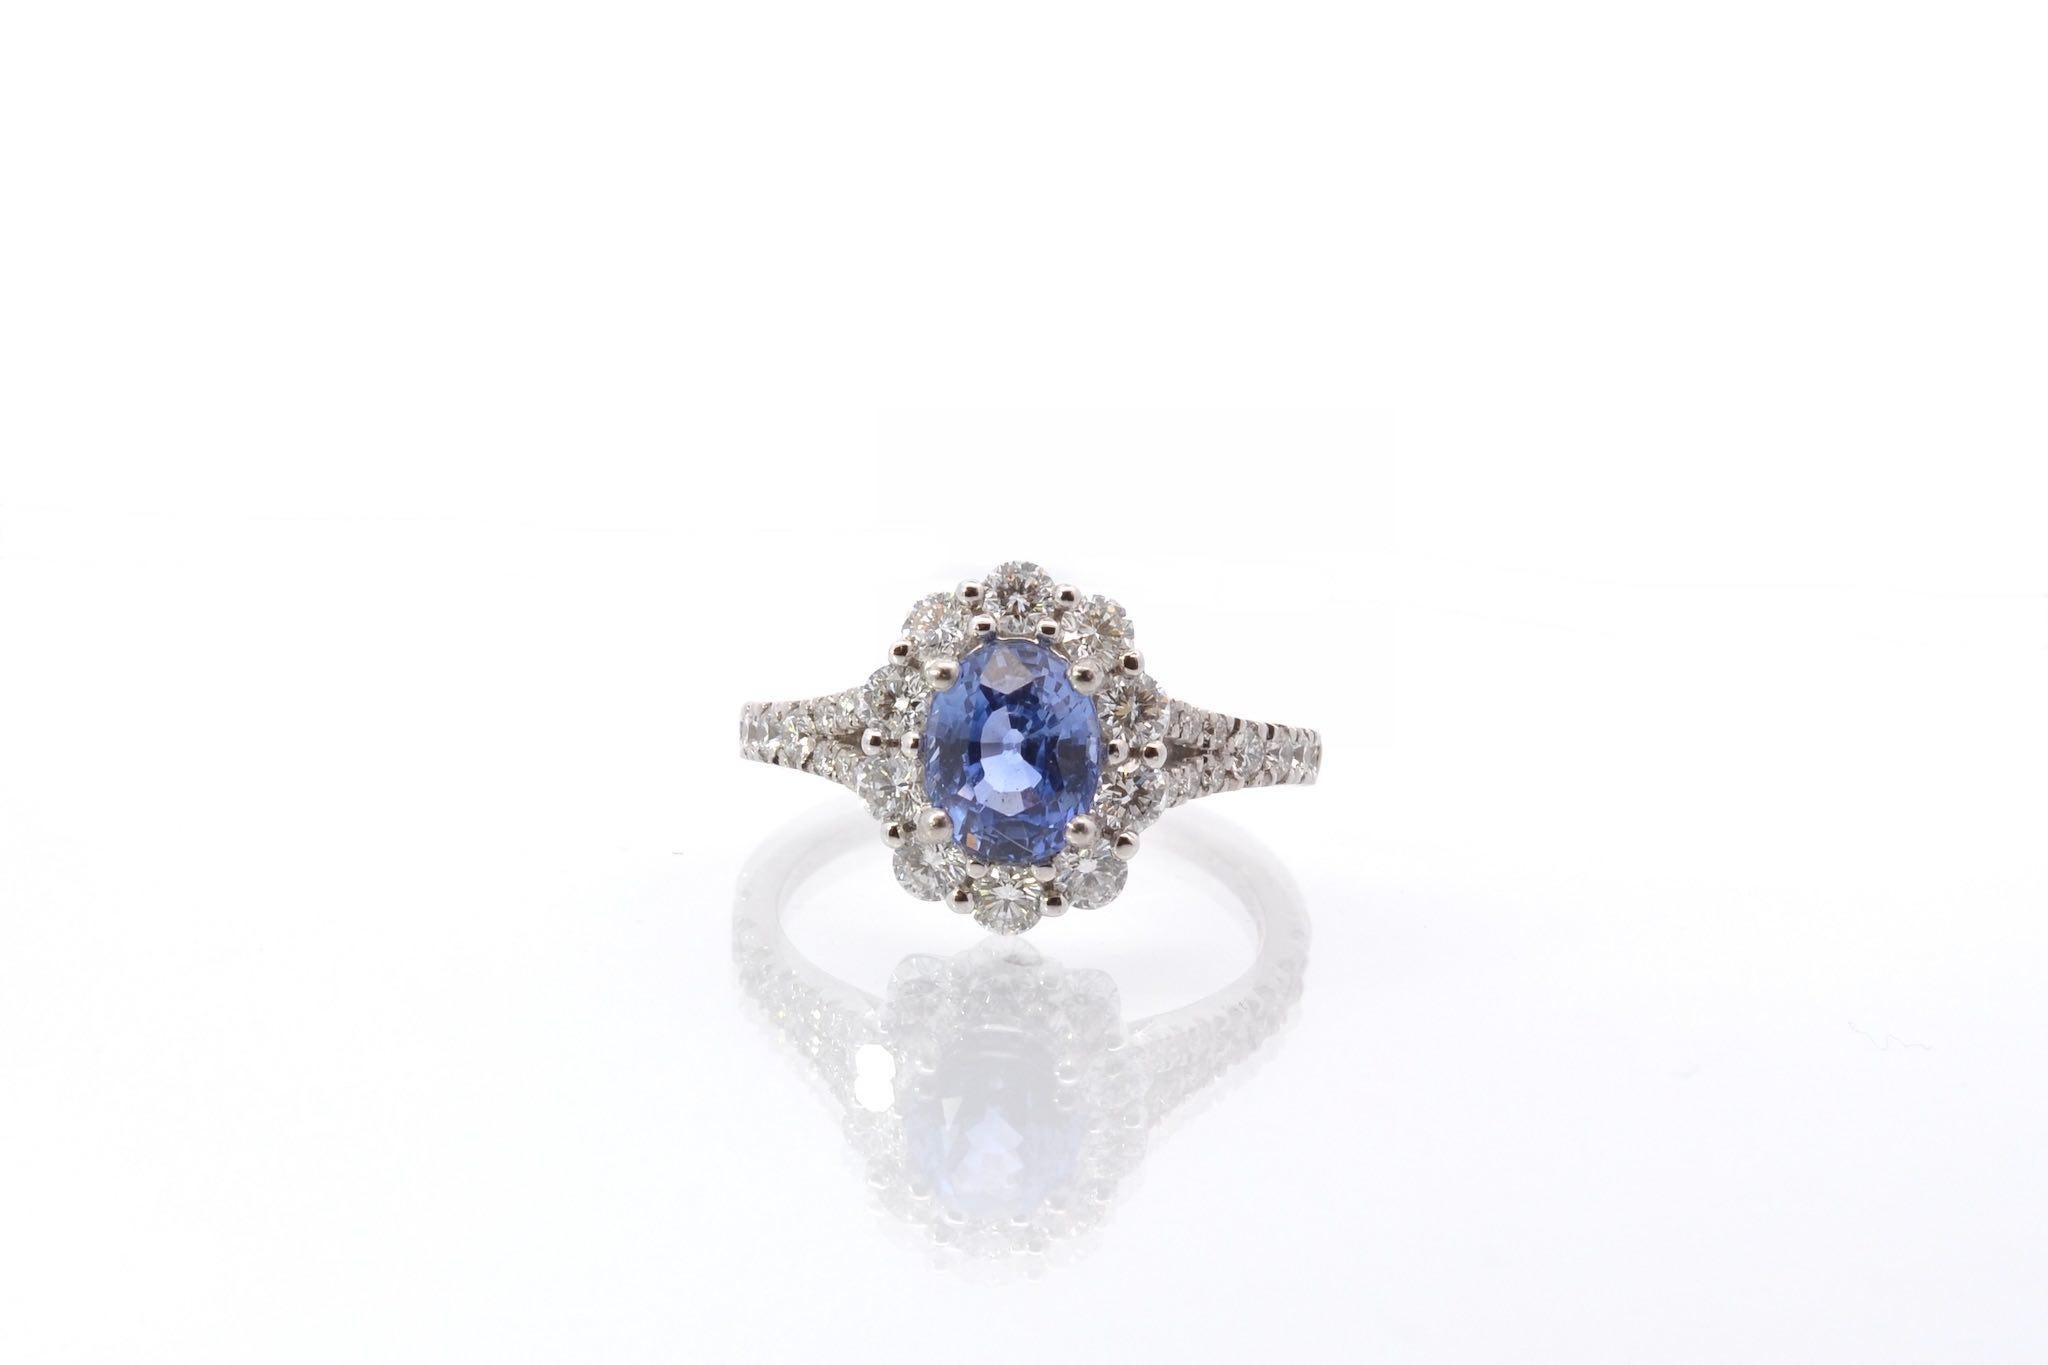 Stones: Oval sapphire: 1.66 cts and 30 diamonds: 0.95 ct
Material: 18k white gold
Dimensions: 1.2 x 1cm
Weight: 4.4g
Period: Recent vintage style
Size: 52 (free sizing)
Certificate
Ref. : 25561